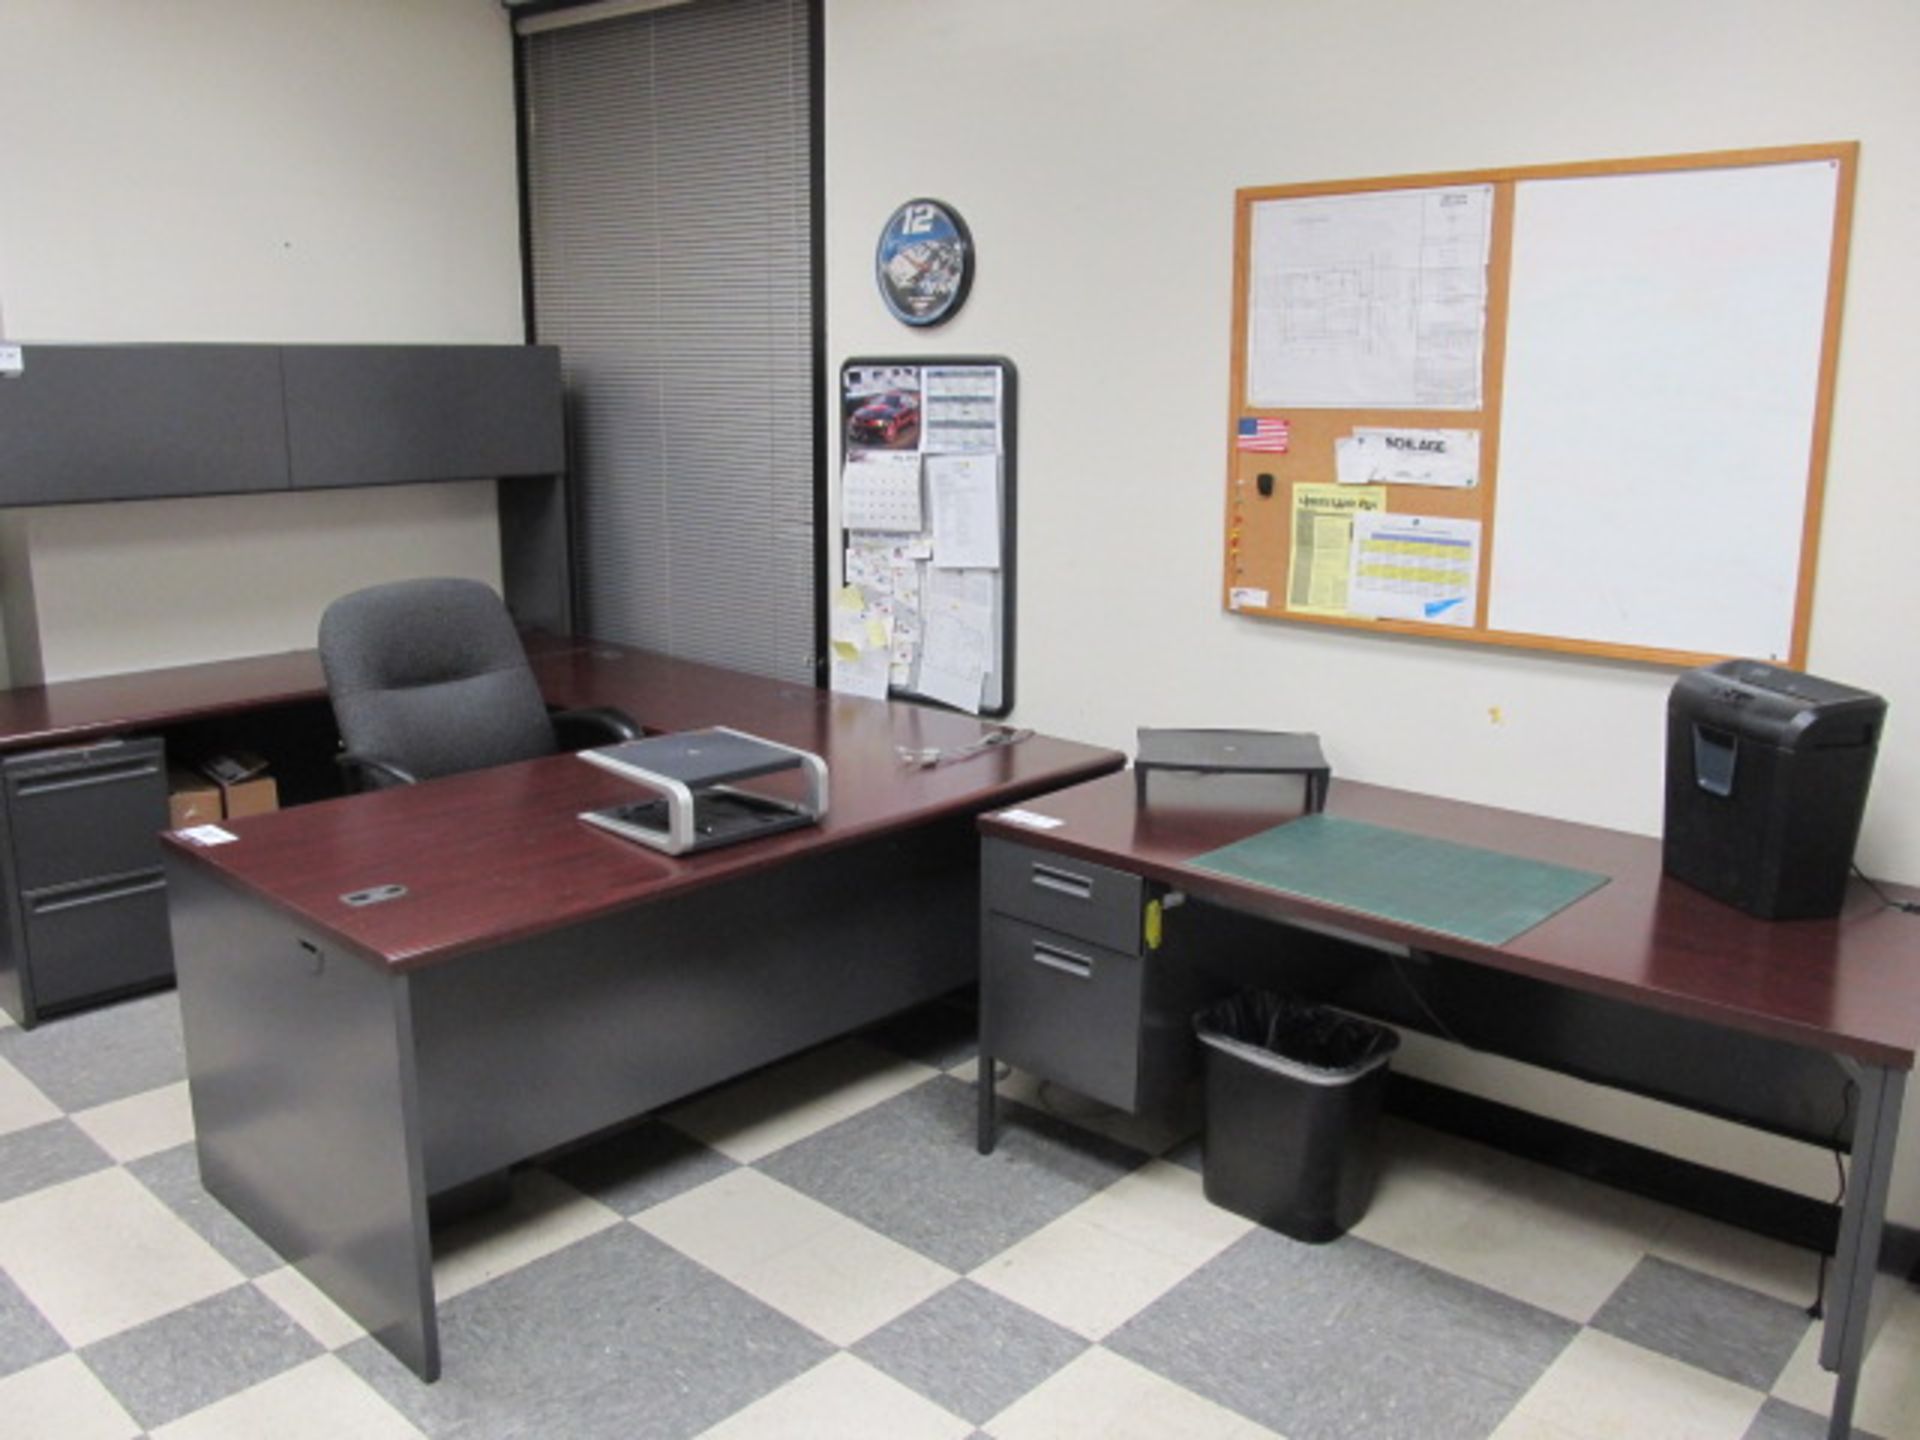 Lot Contents Of Office, (1) L-Shaped Desk With Return, Over Head Cubby, (2) Metal 2 Drawer Lateral